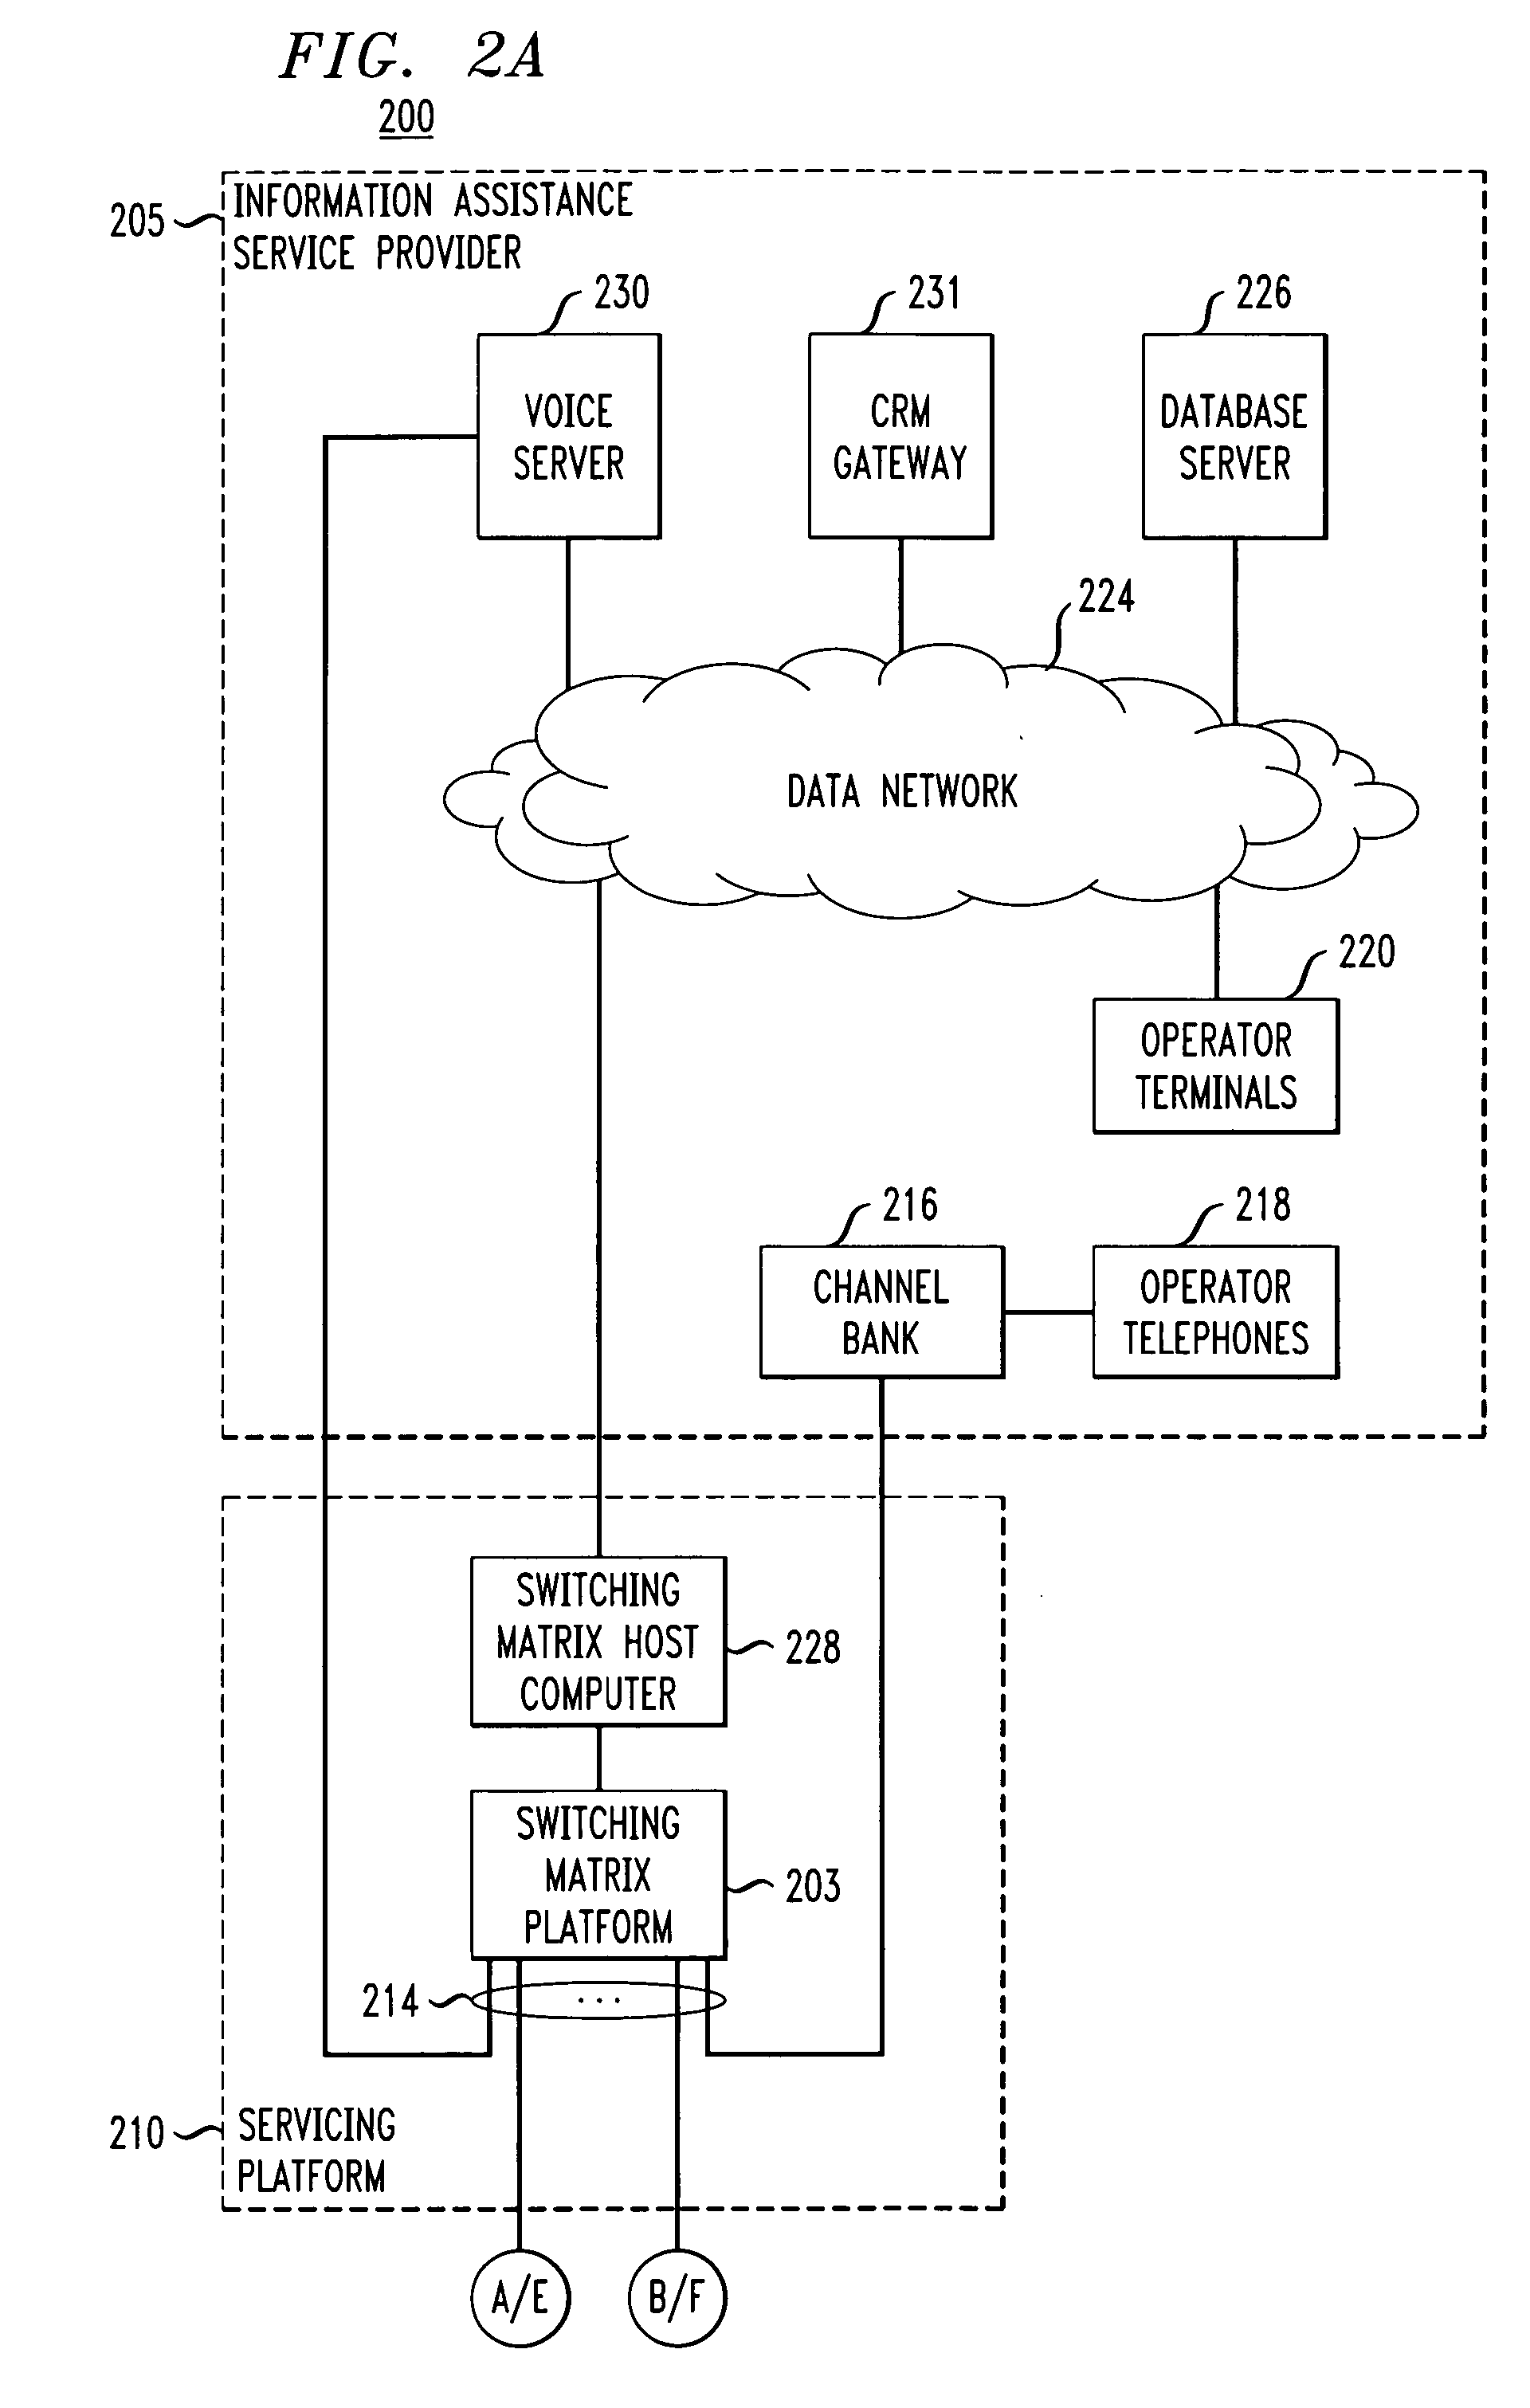 Technique for generating and accessing organized information through an information assistance service